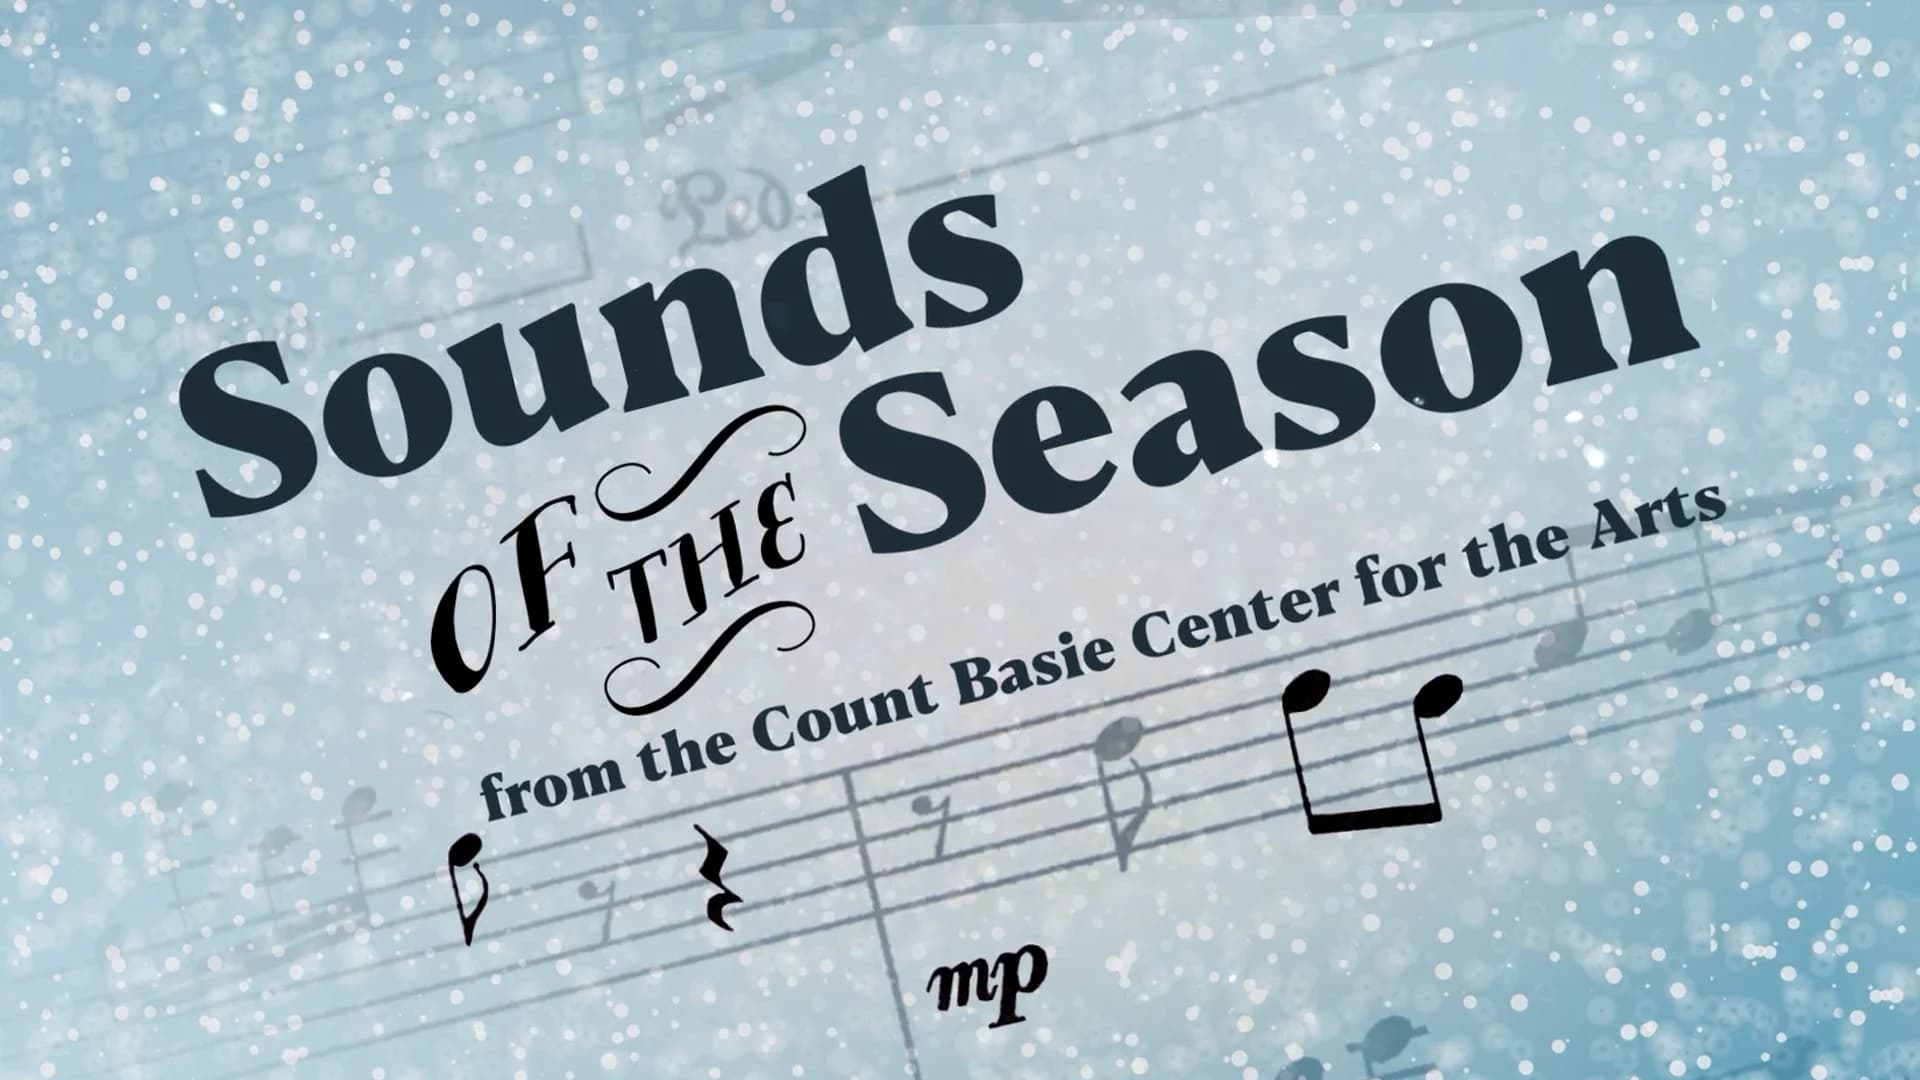 Sounds of the Season 2021 show schedule